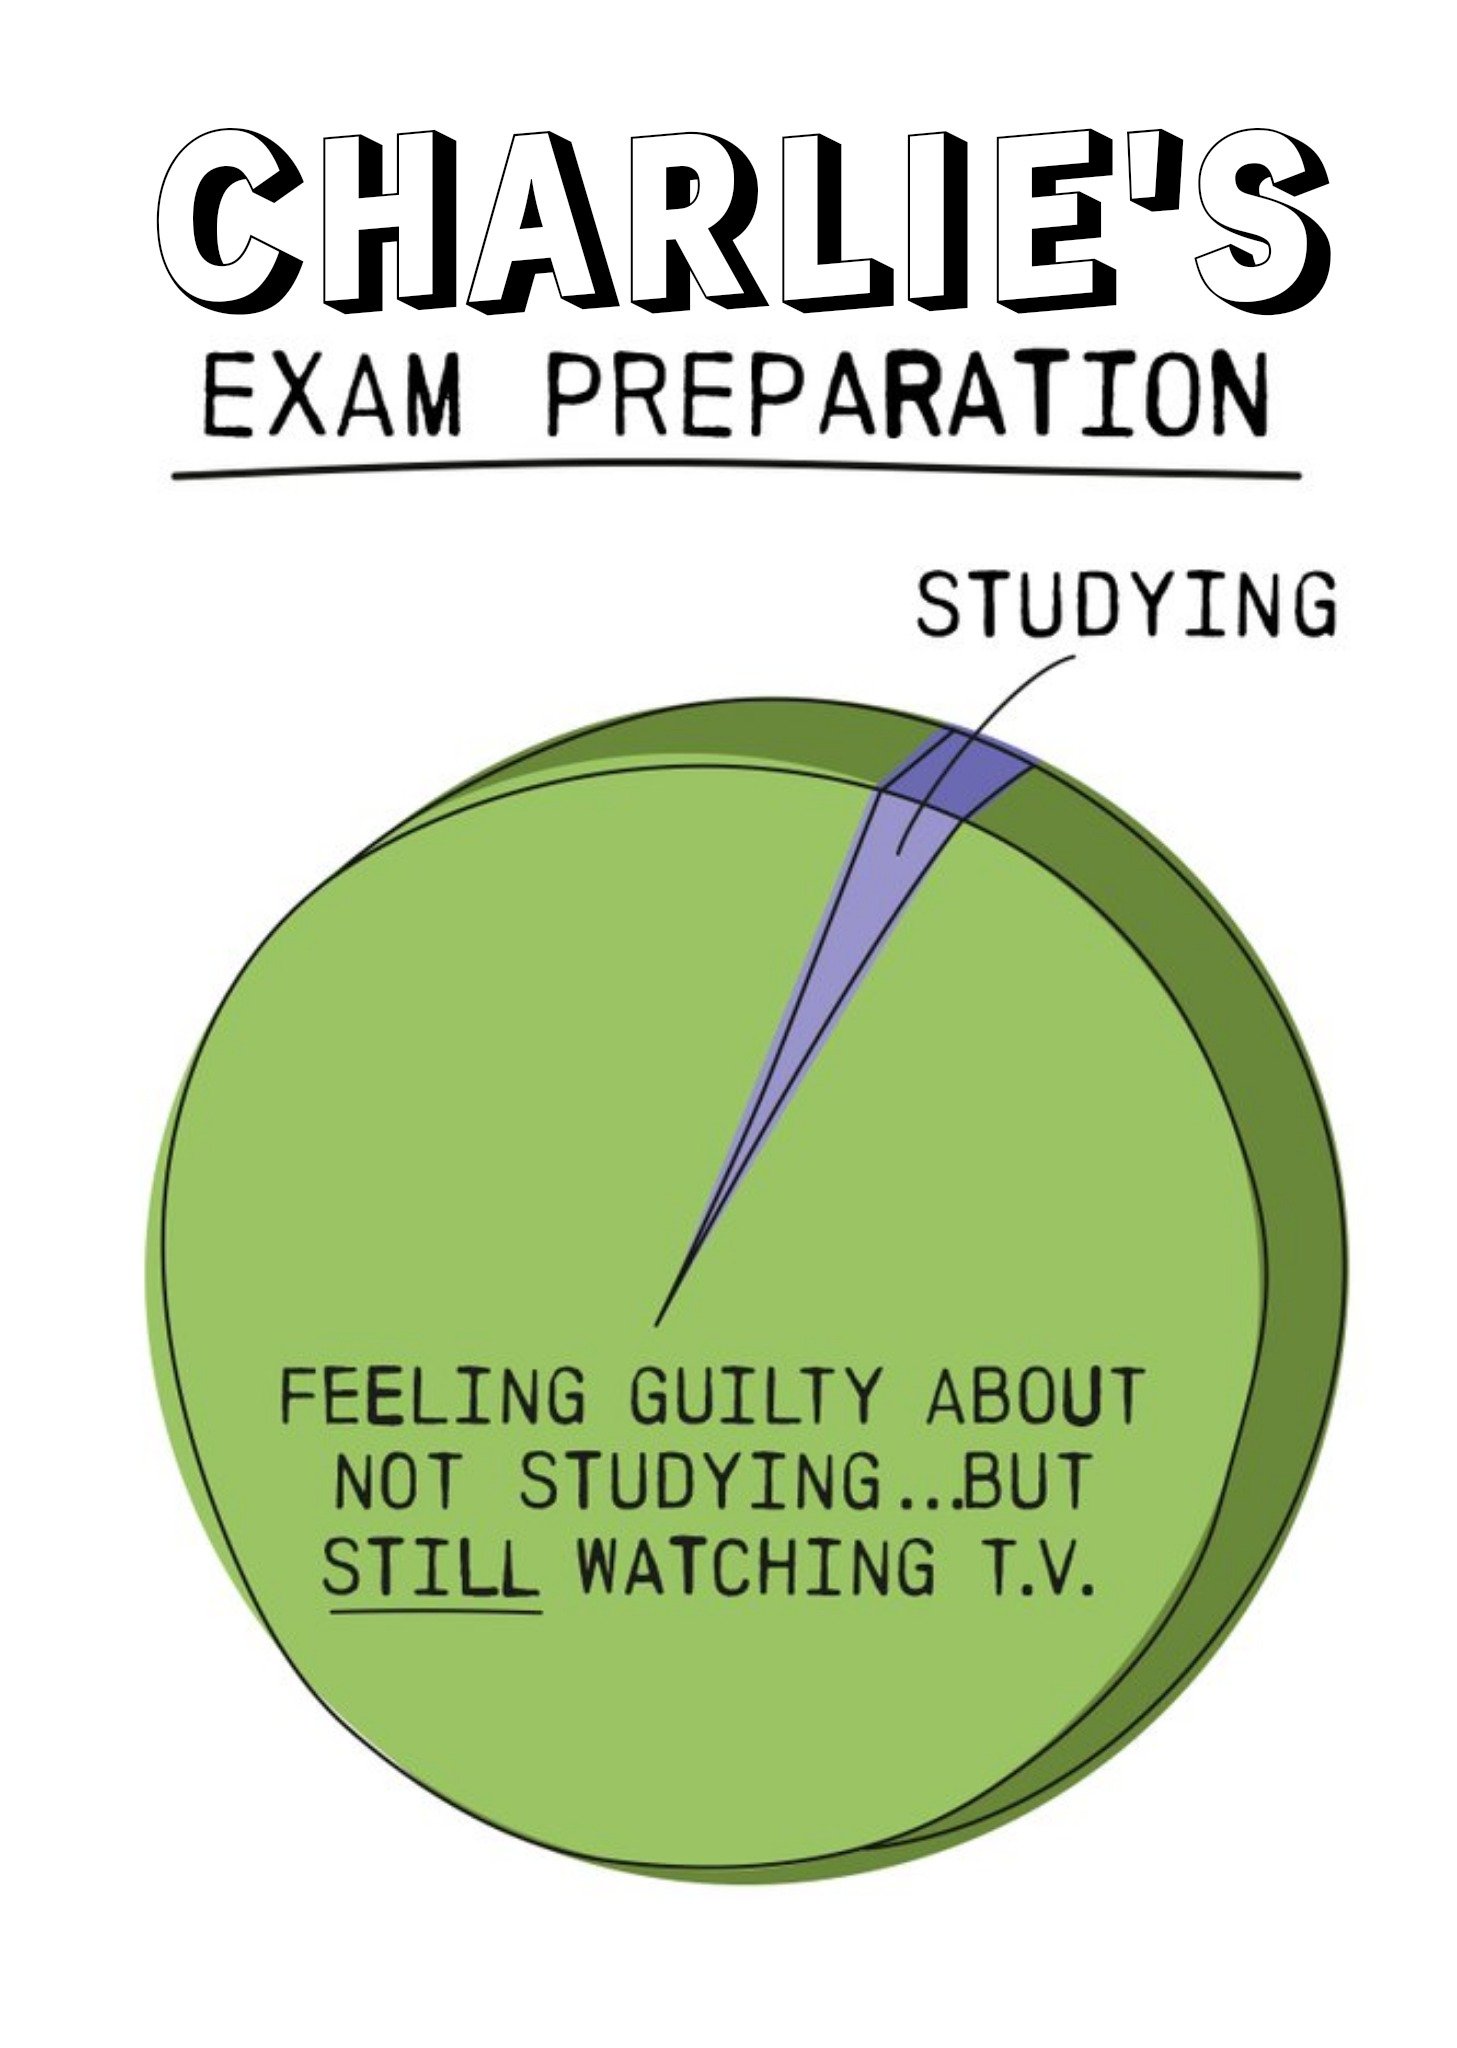 Moonpig Illustrations Of A Studying Pie Chart Funny Exam Preparation Card, Large